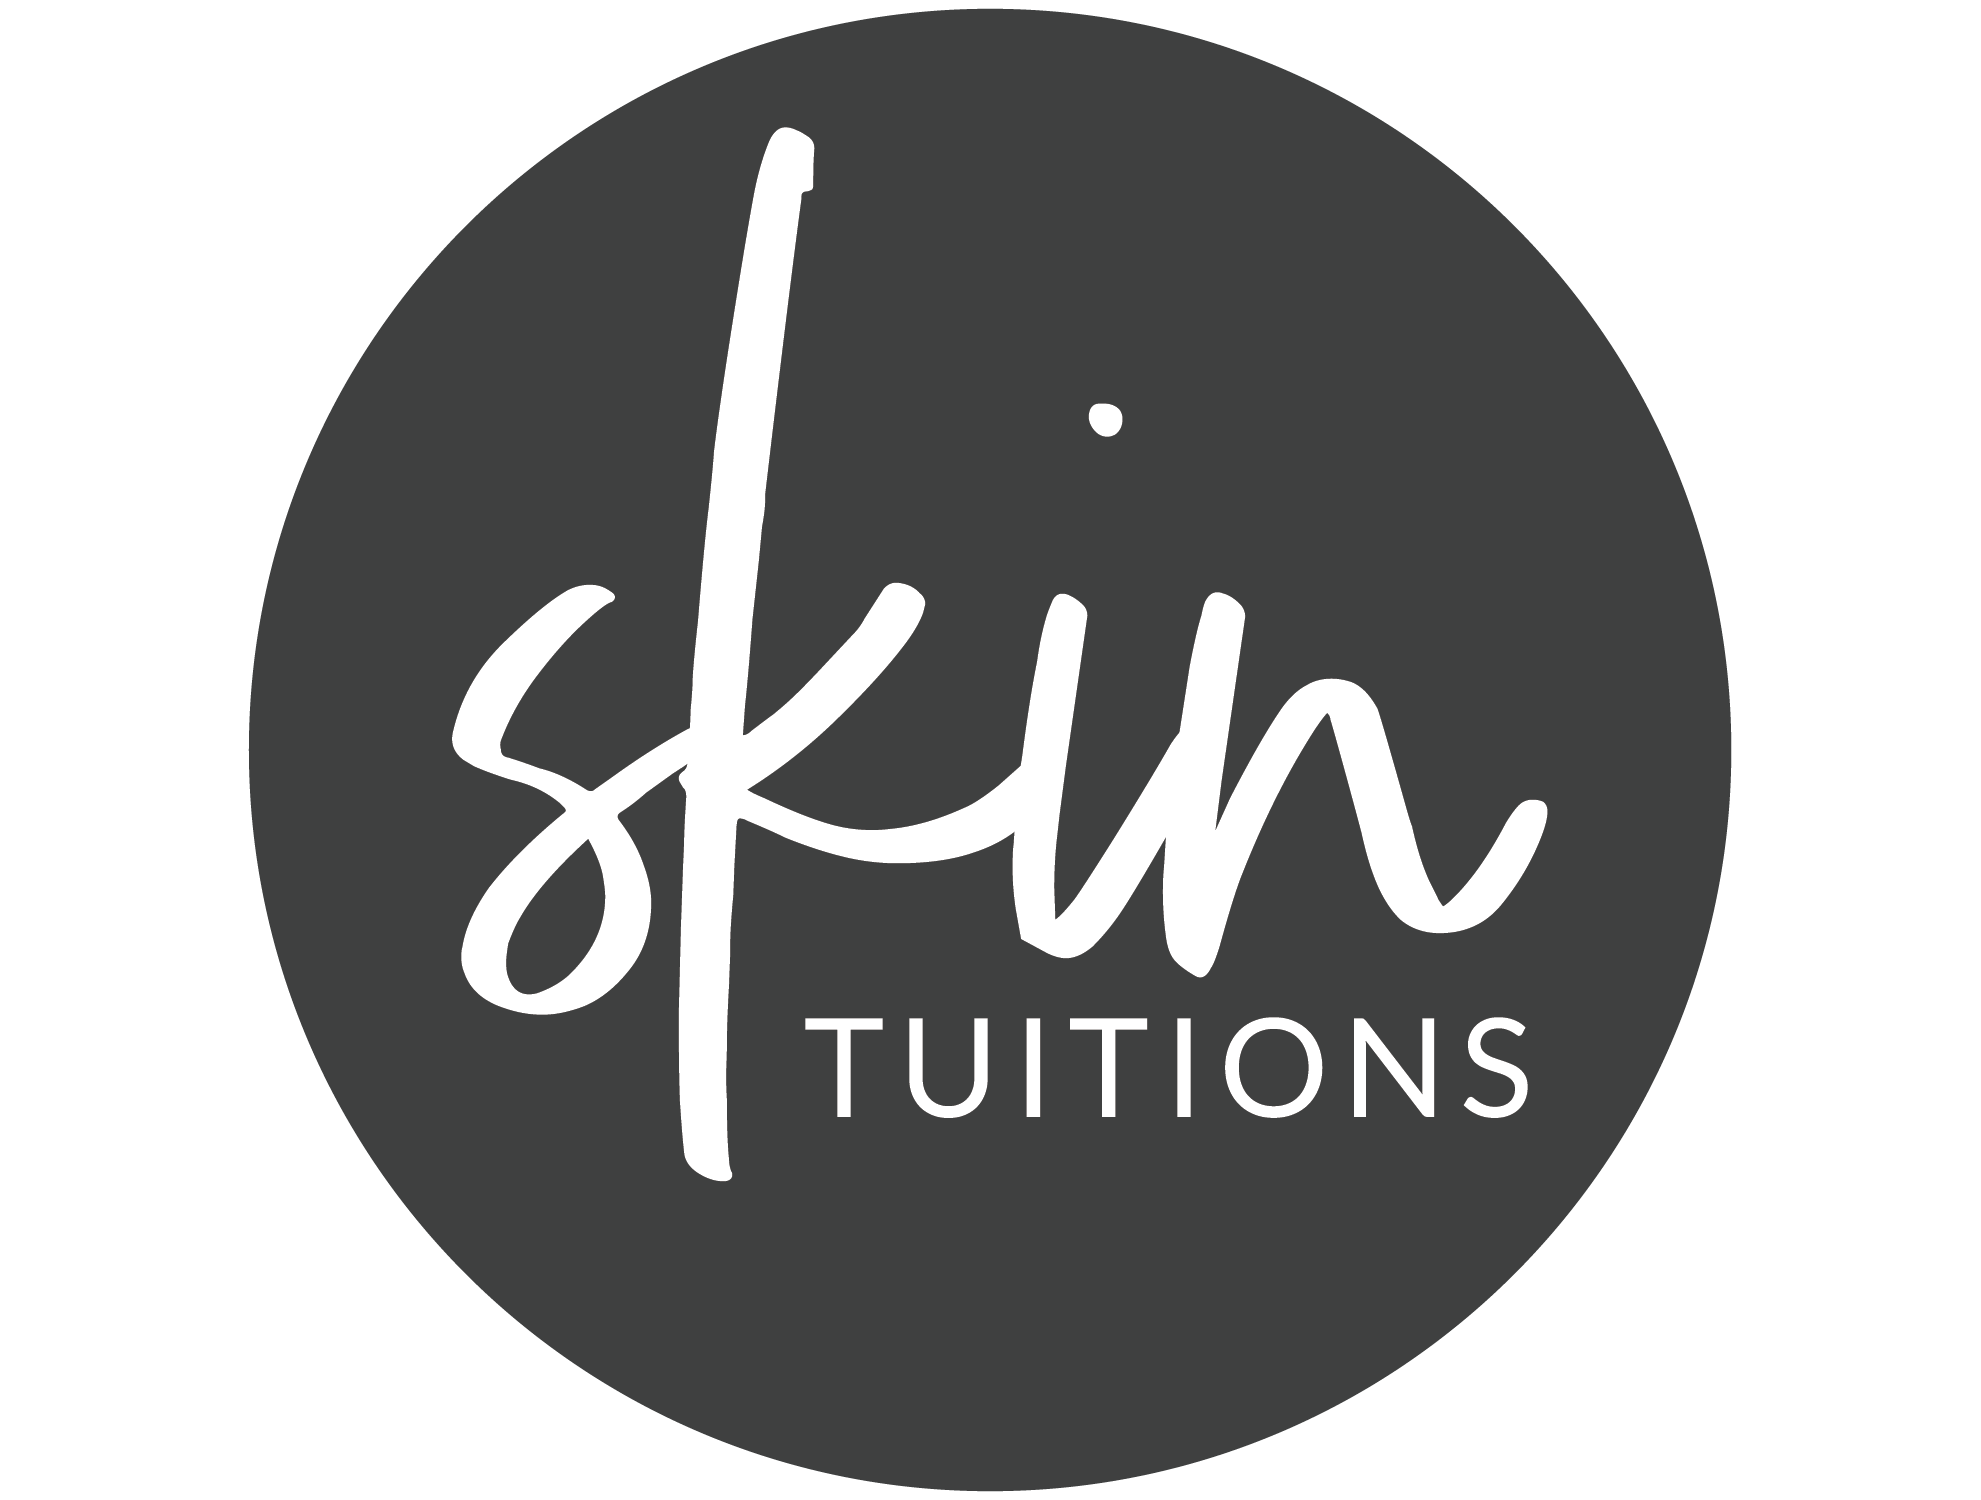 Skintuitions